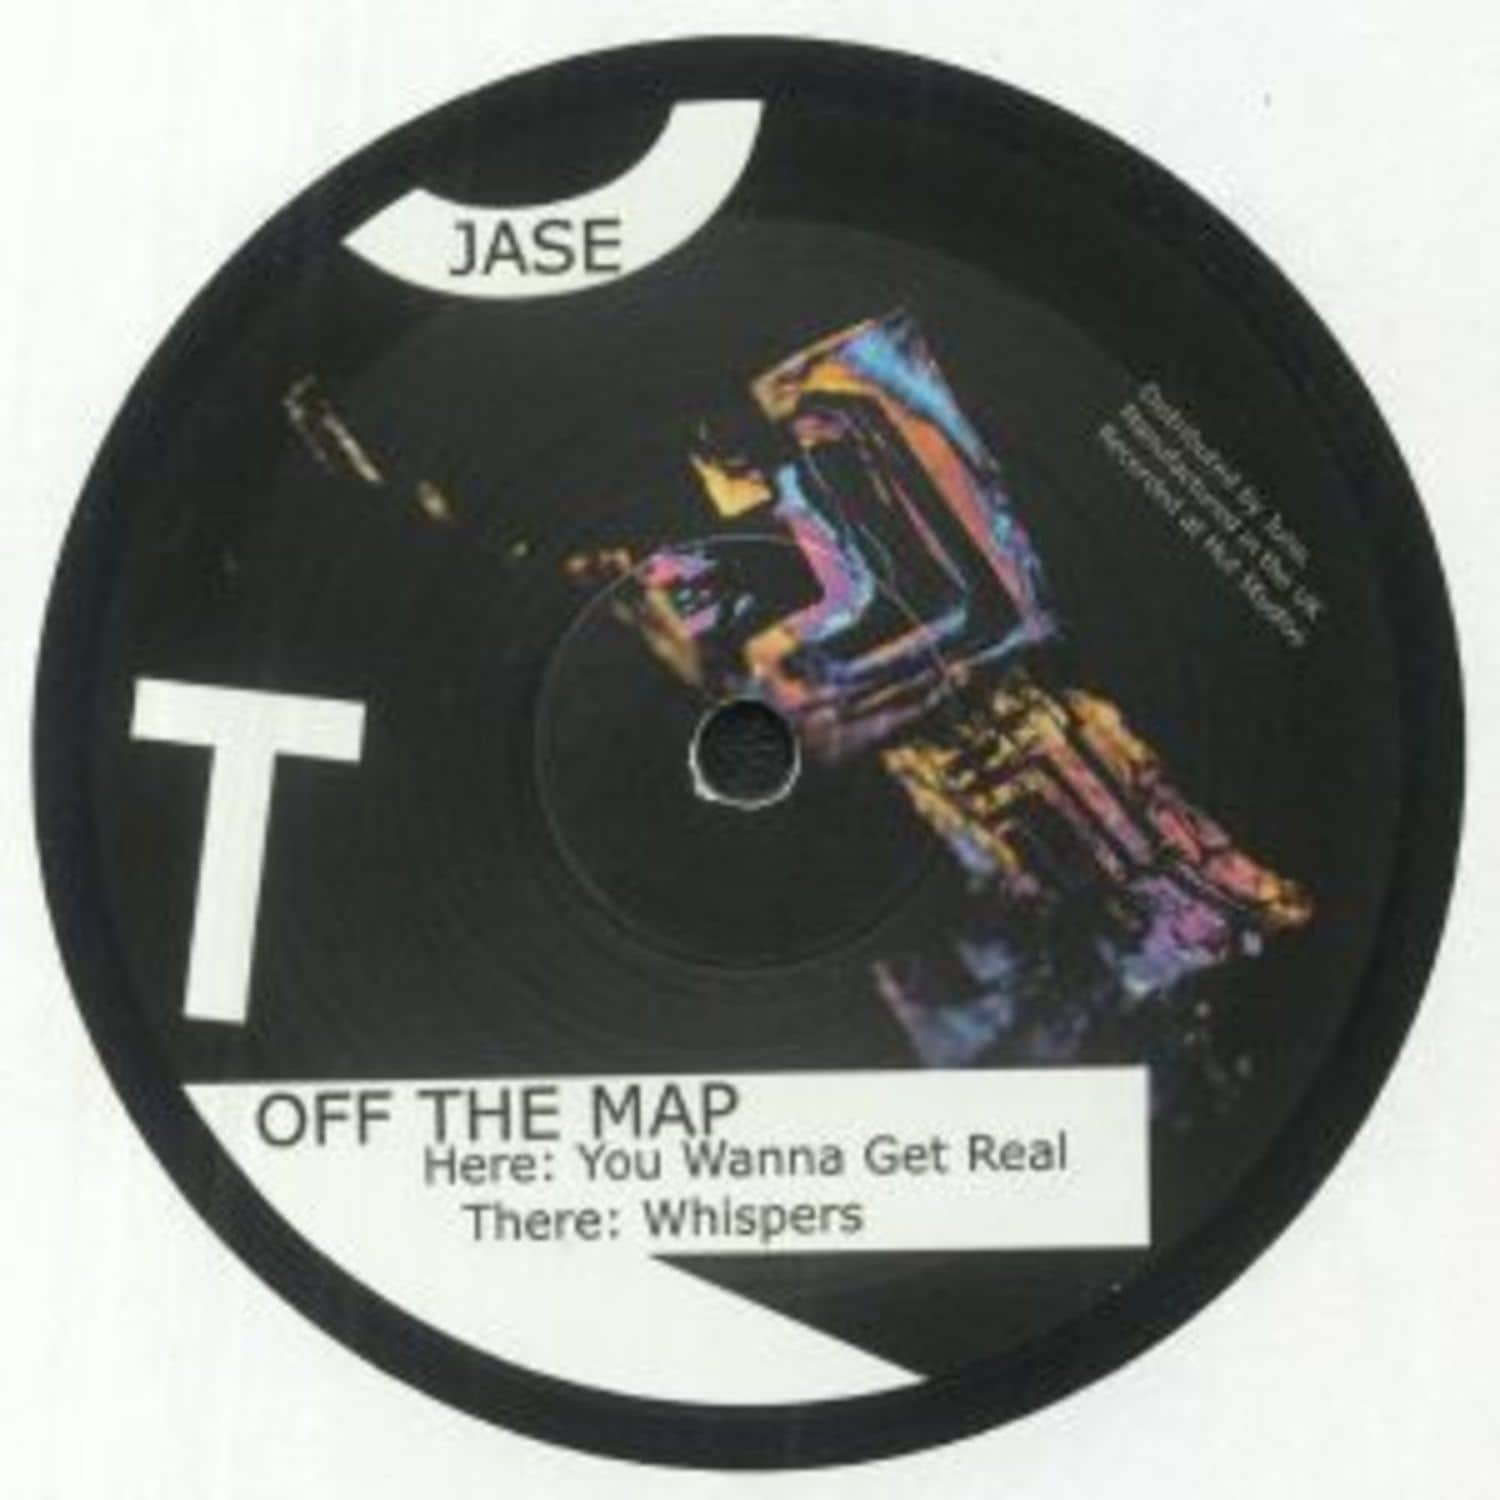 Jase - OUT THERE EP